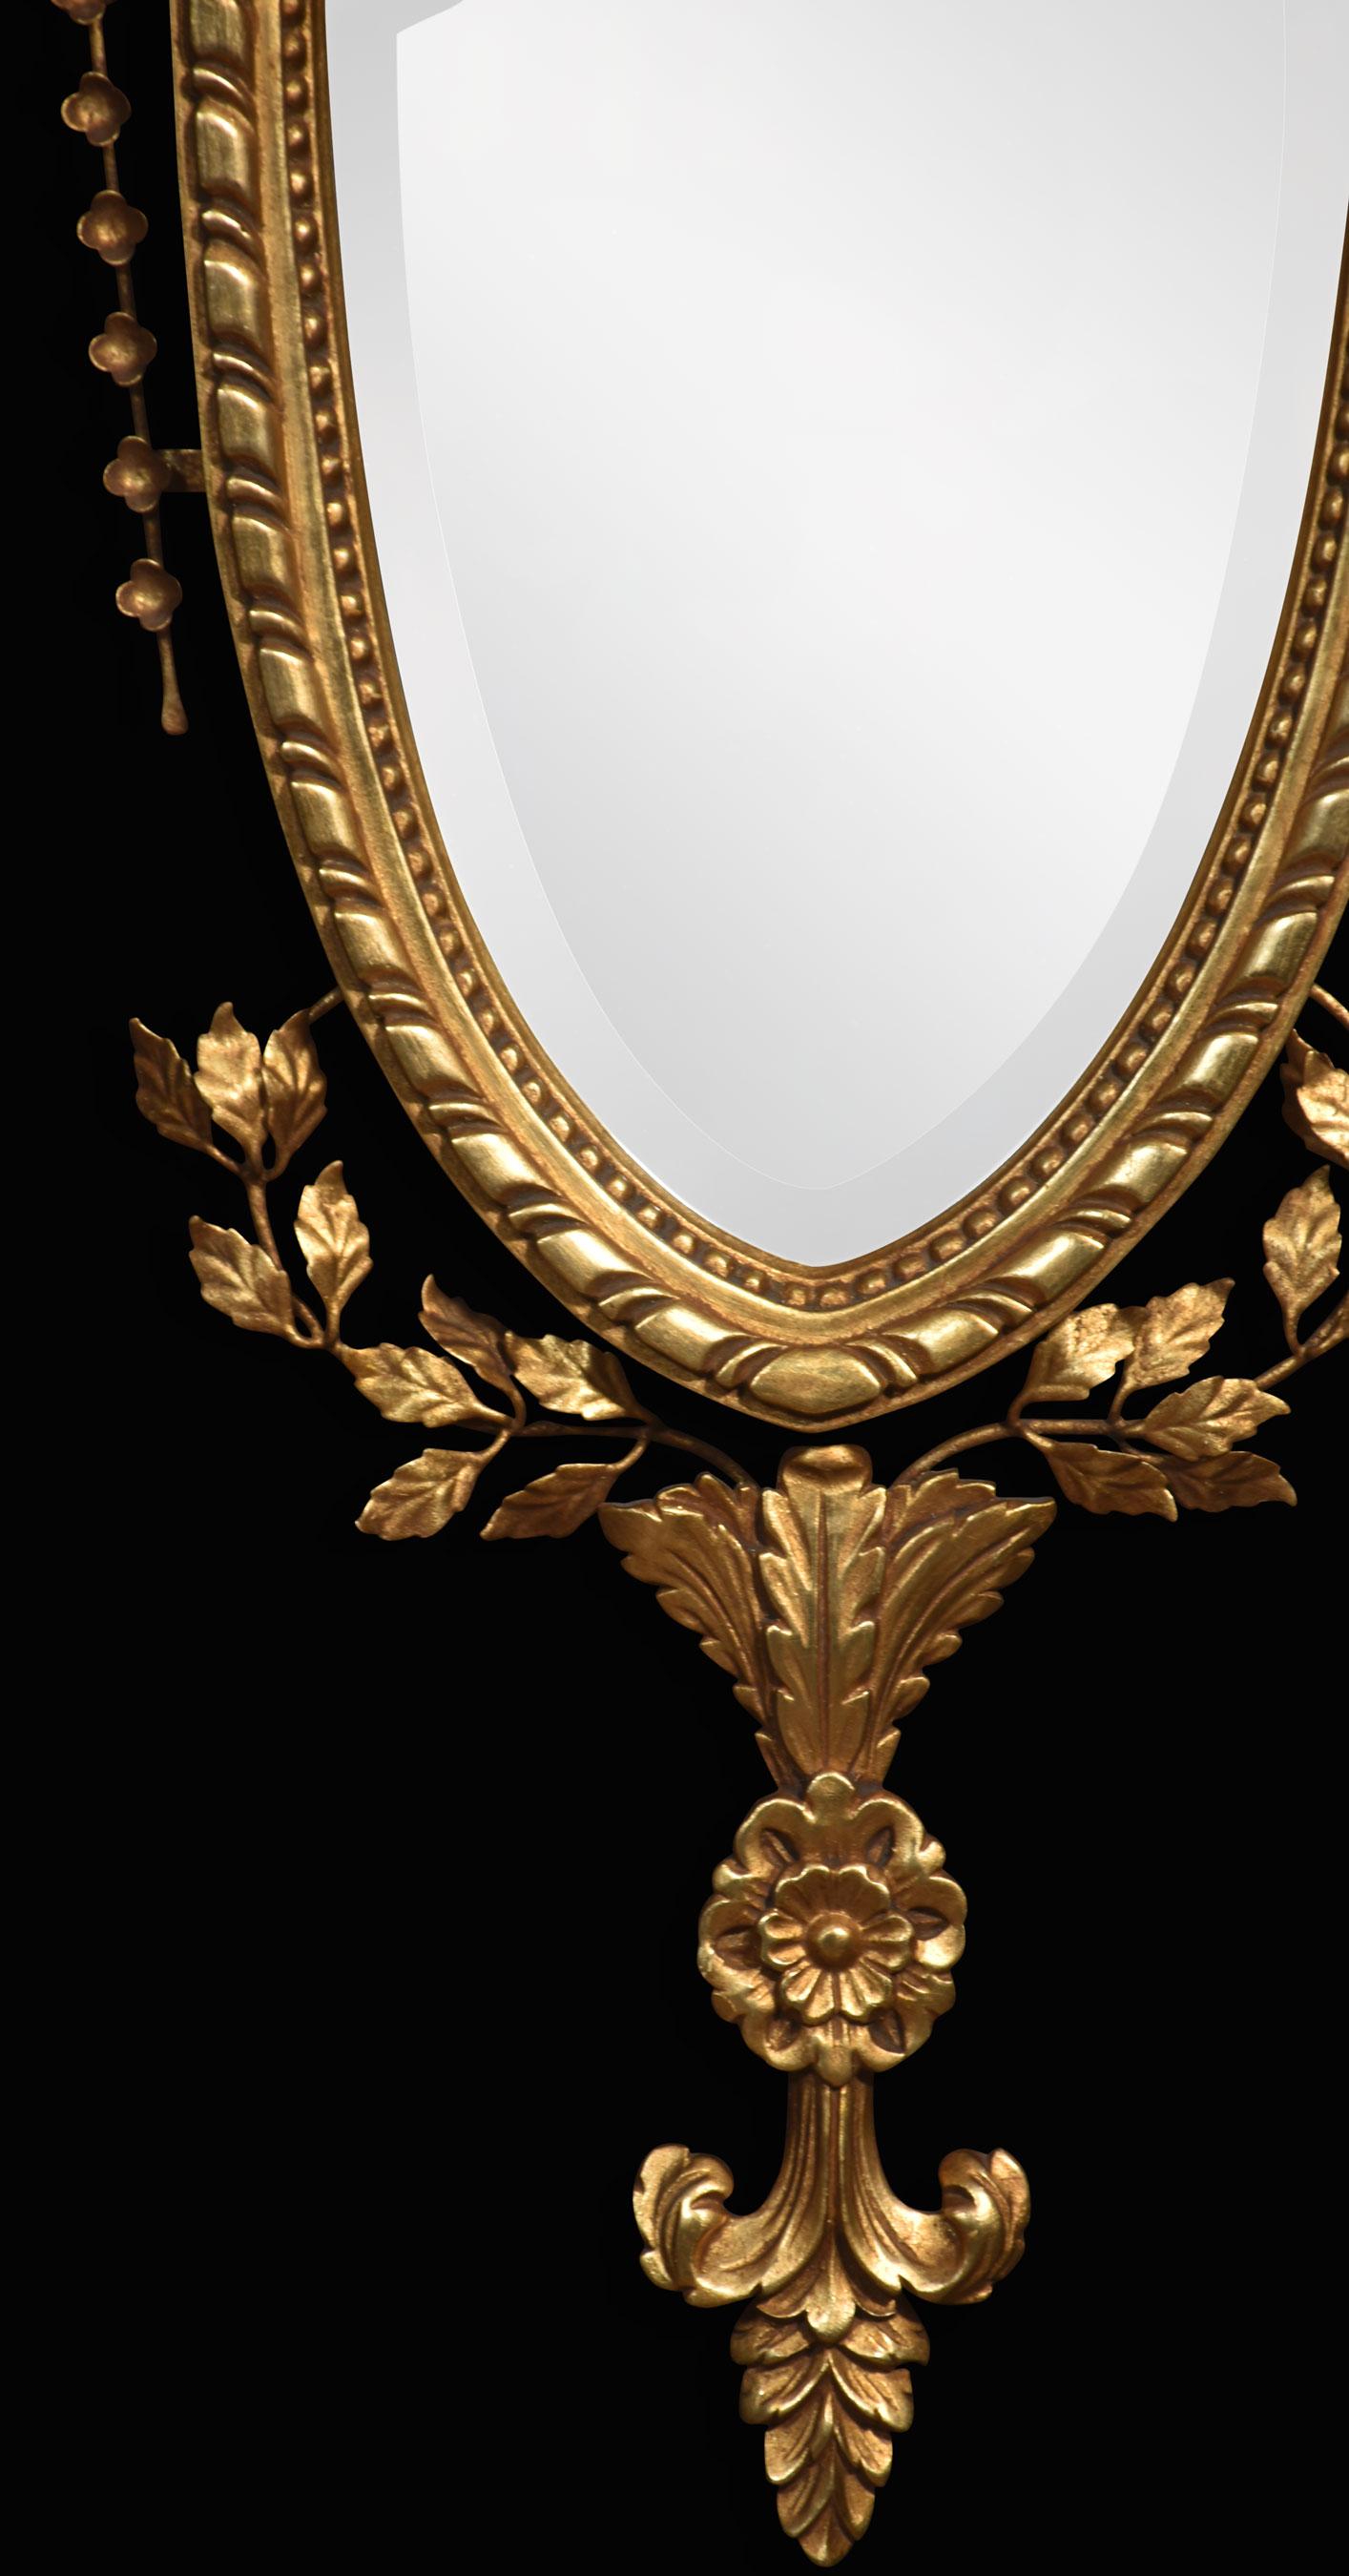 Pair of gilt-wood wall mirrors, the feather cresting above harebell swags to the central original bevelled mirror having a smaller oval mirror above, encased in a carved giltwood frame with leaf decoration.
Dimensions
Height 47.5 Inches
Width 17